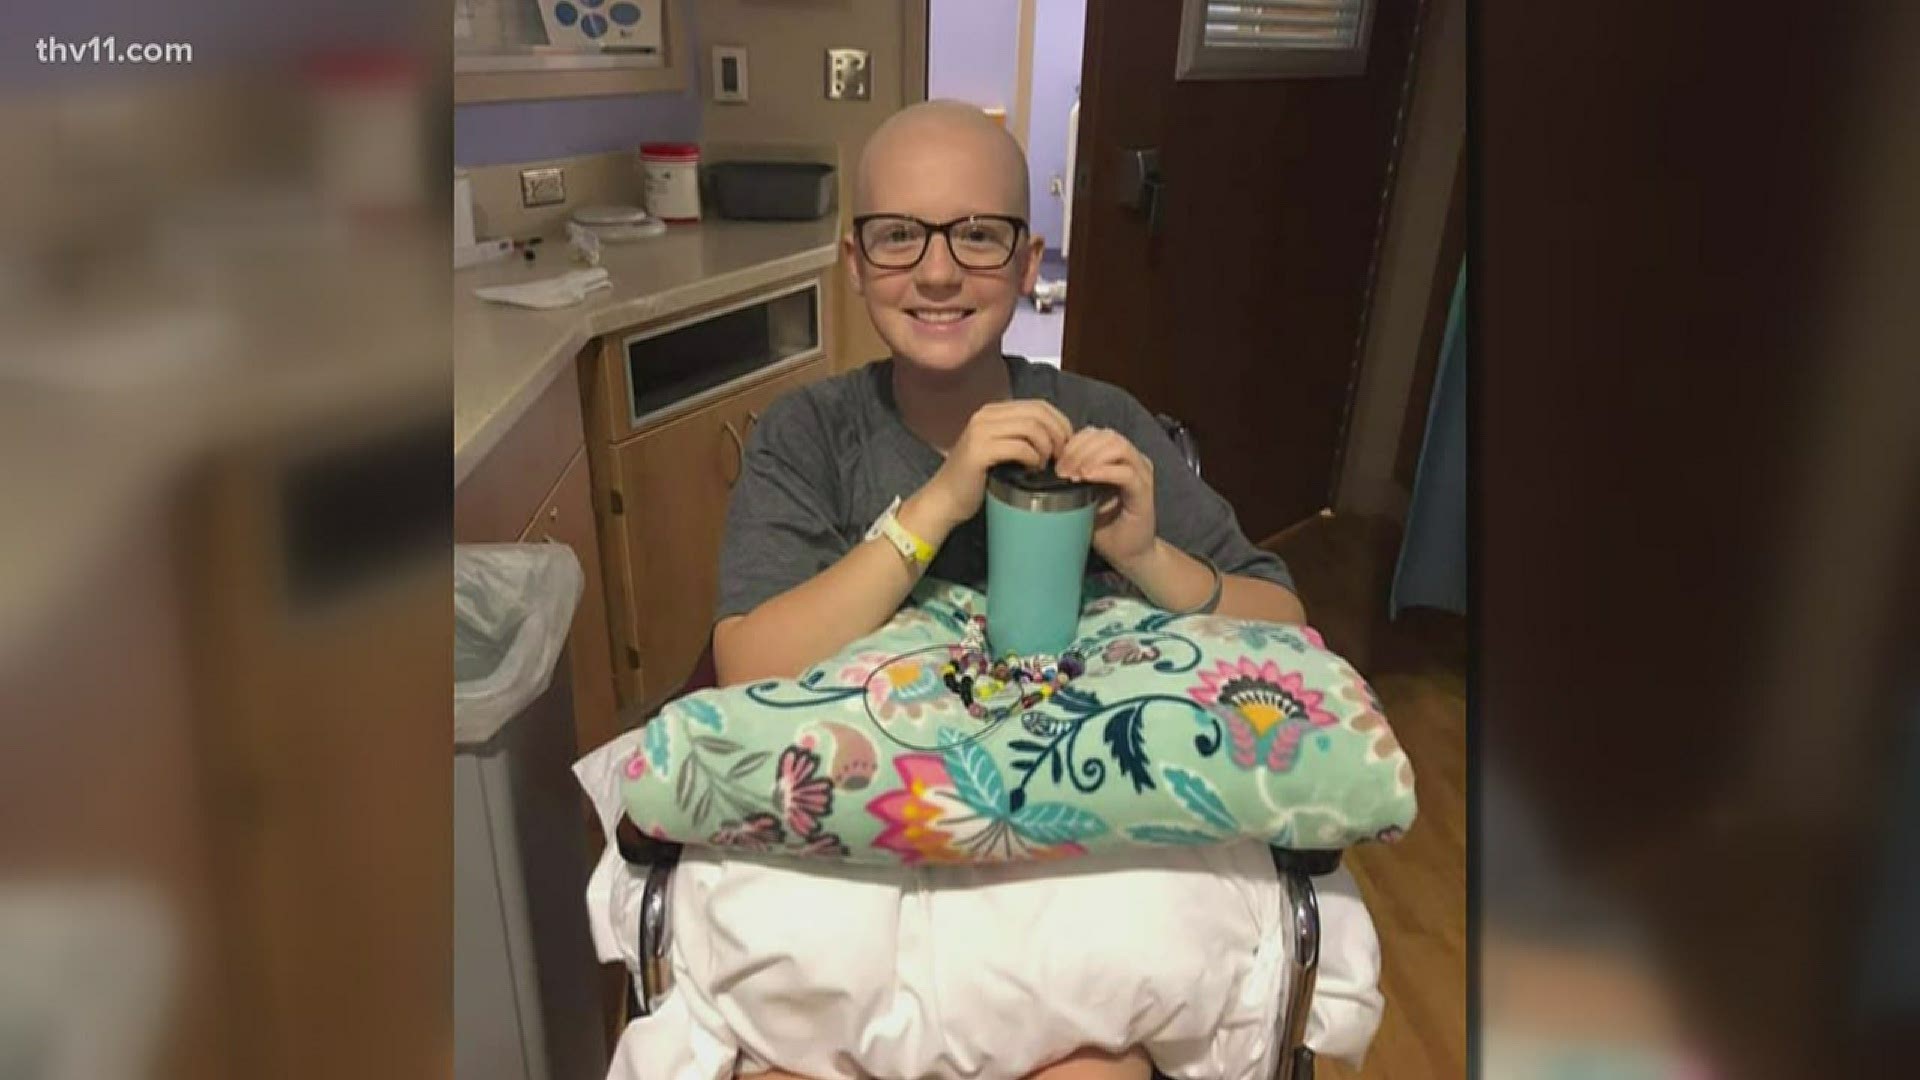 Hailey Carney, a Mayflower teen with a rare form of bone cancer, is having surgery next week. The community came together to wish her well.